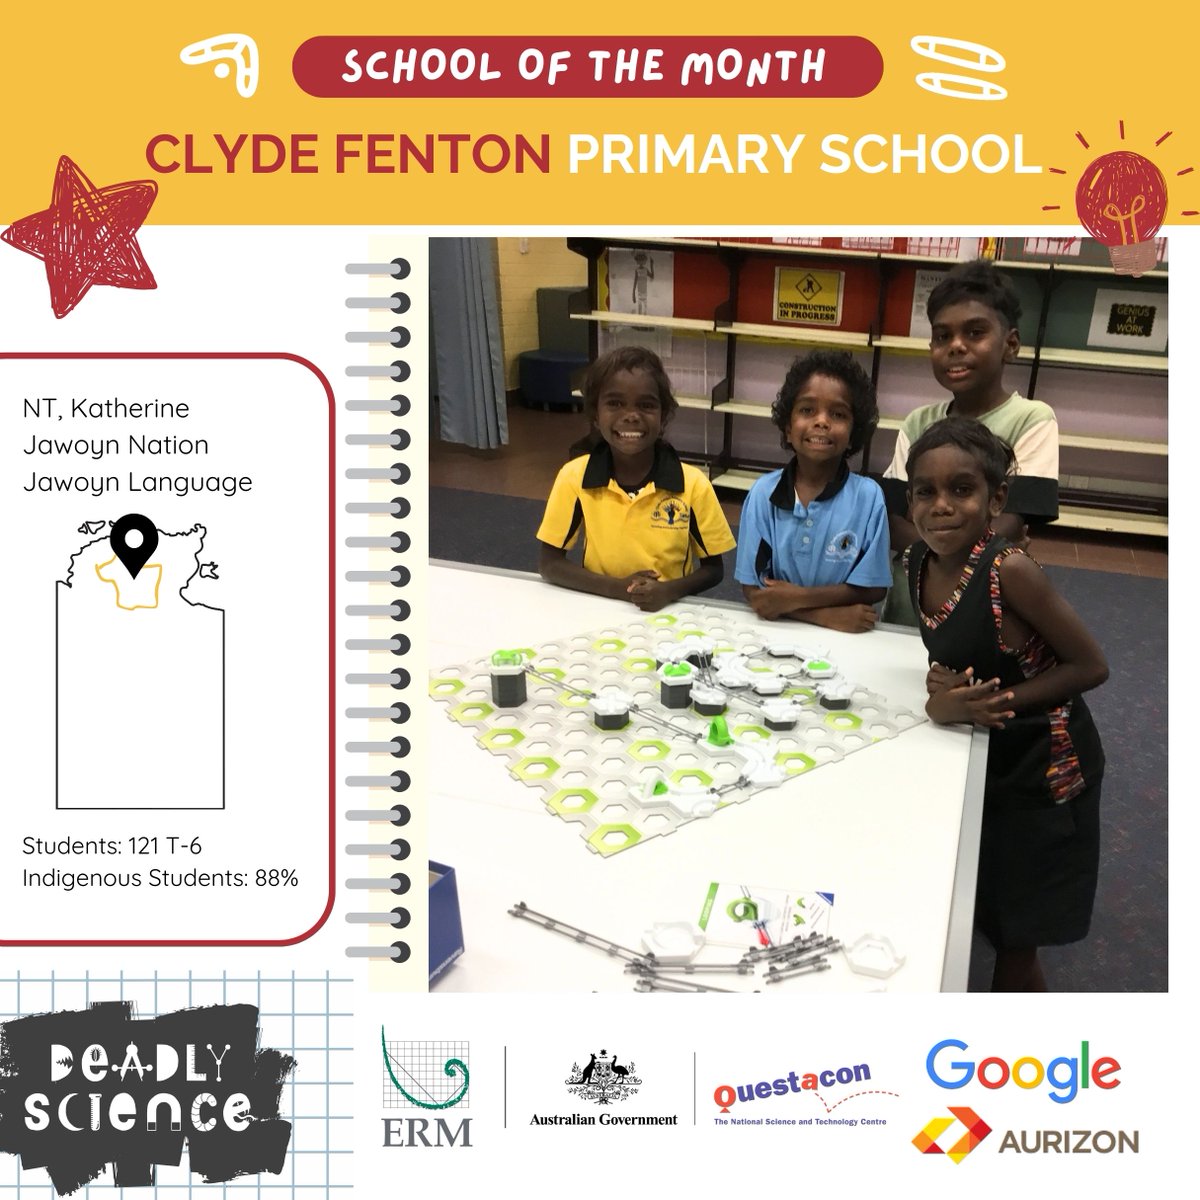 Celebrating our latest School of the Month - Clyde Fenton Primary School! Here are some of their deadly learners discovering physics using the GraviTrax Marble Run. Do you want to be the next School of the Month? Email: admin@deadlyscience.org.au